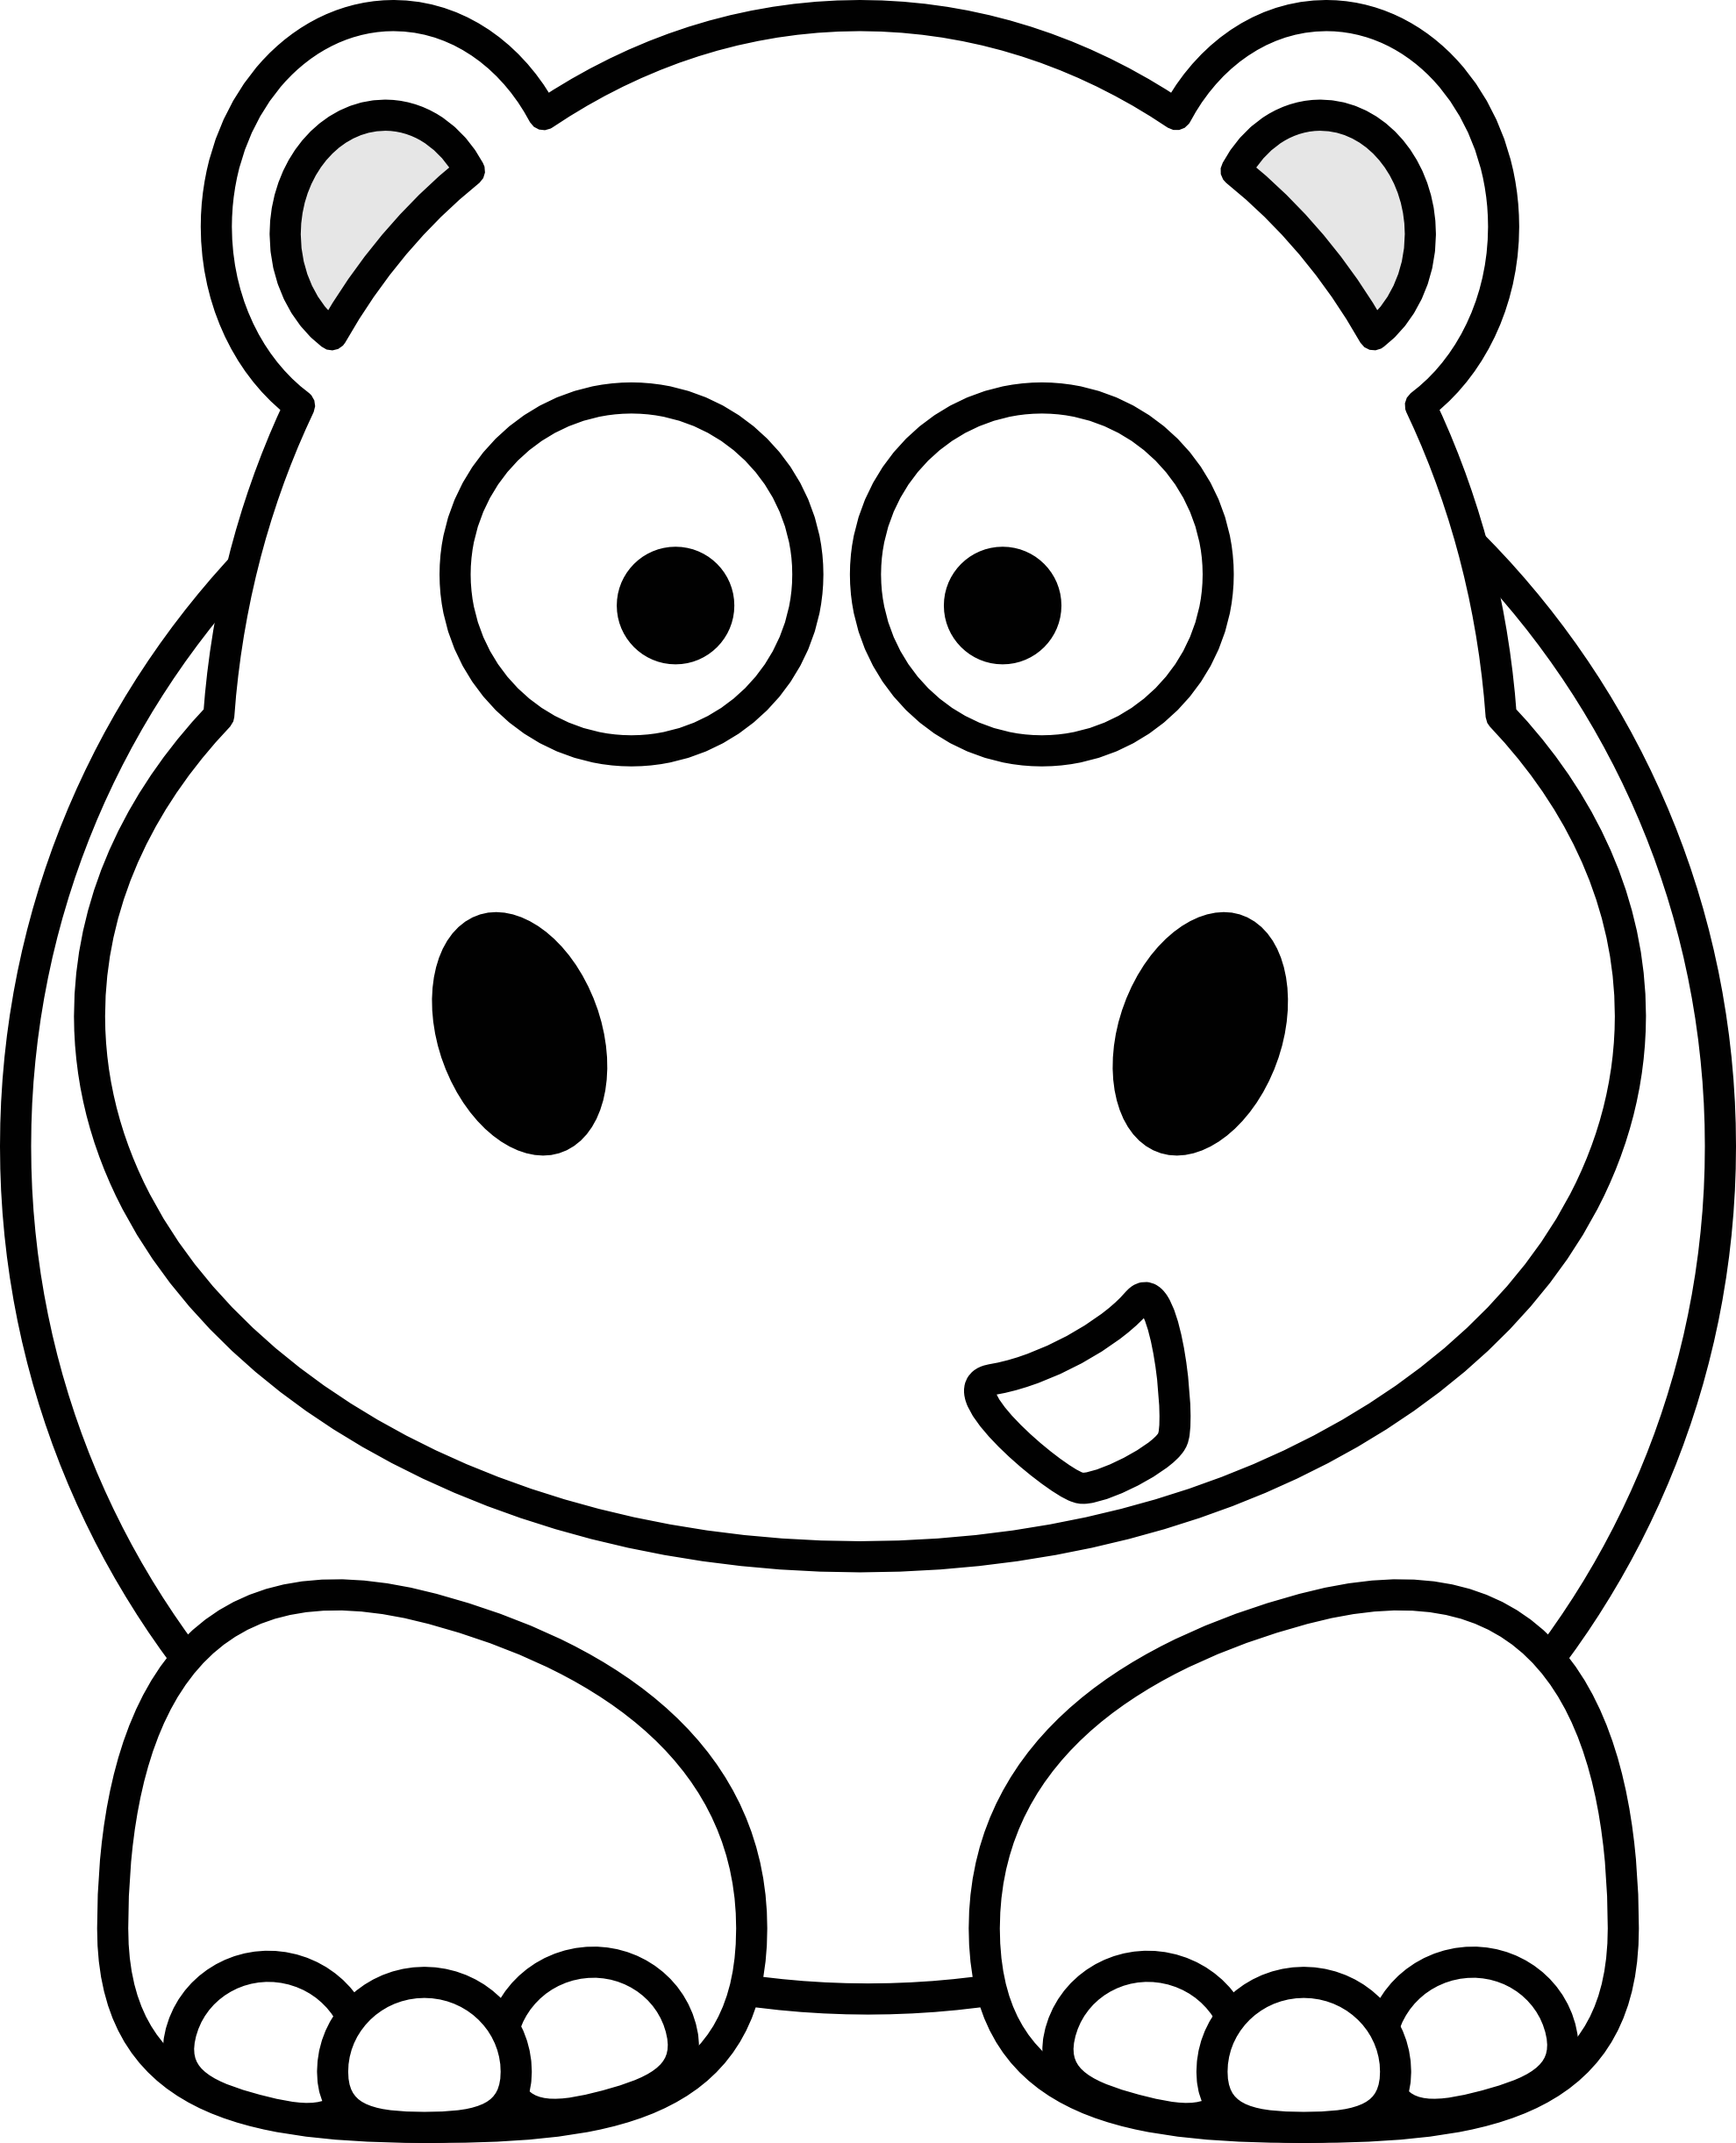 Hippo Clipart Black And White | Clipart library - Free Clipart Images